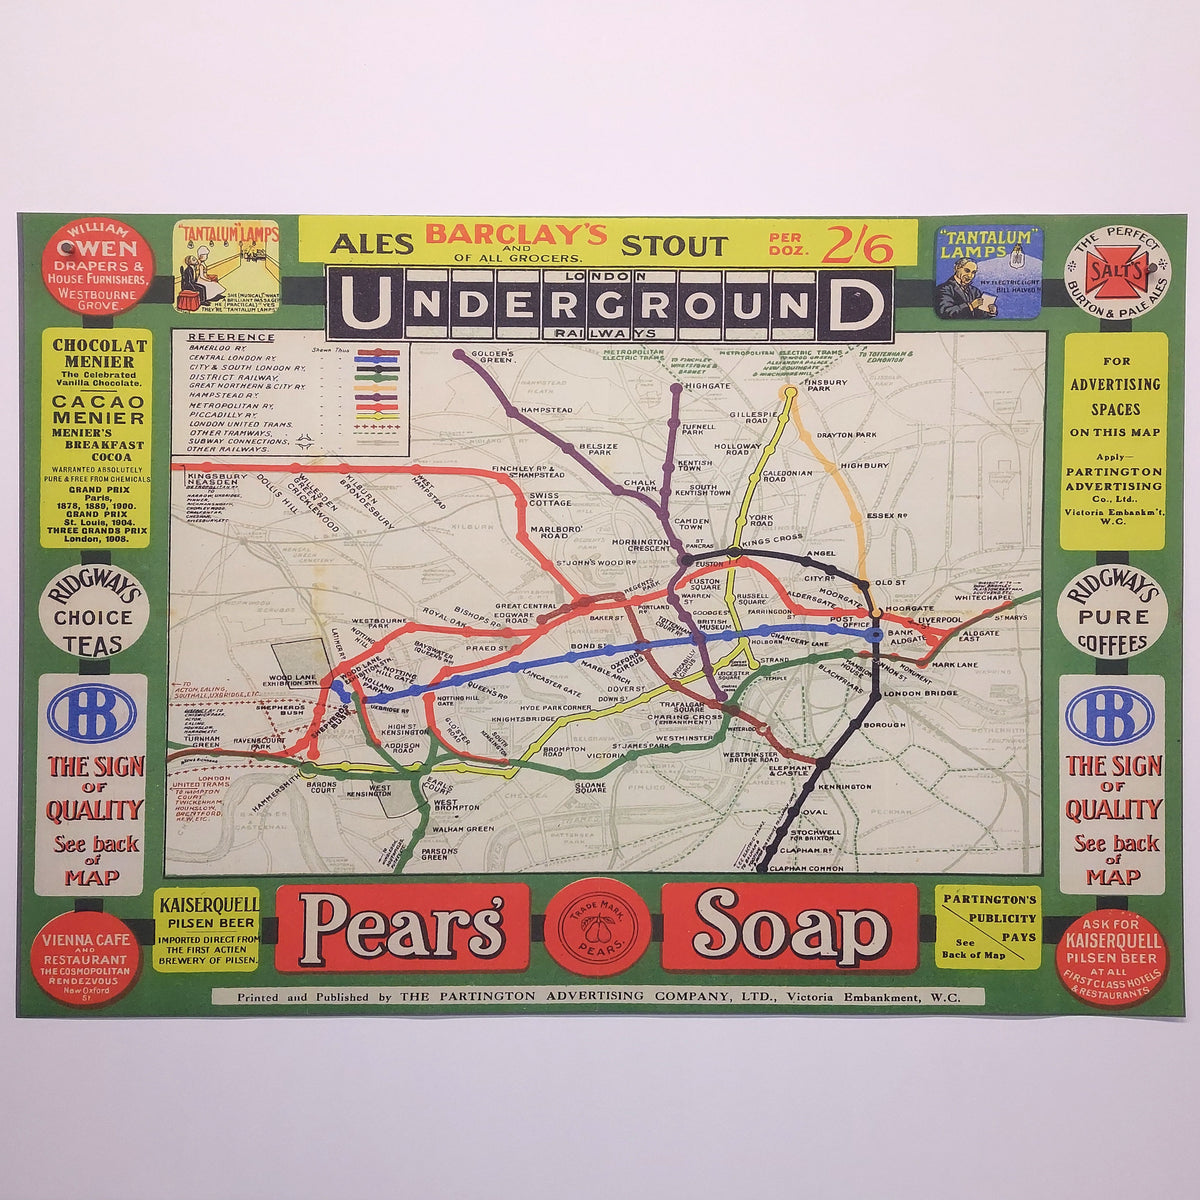 The London Underground - Vintage Map Reproduction